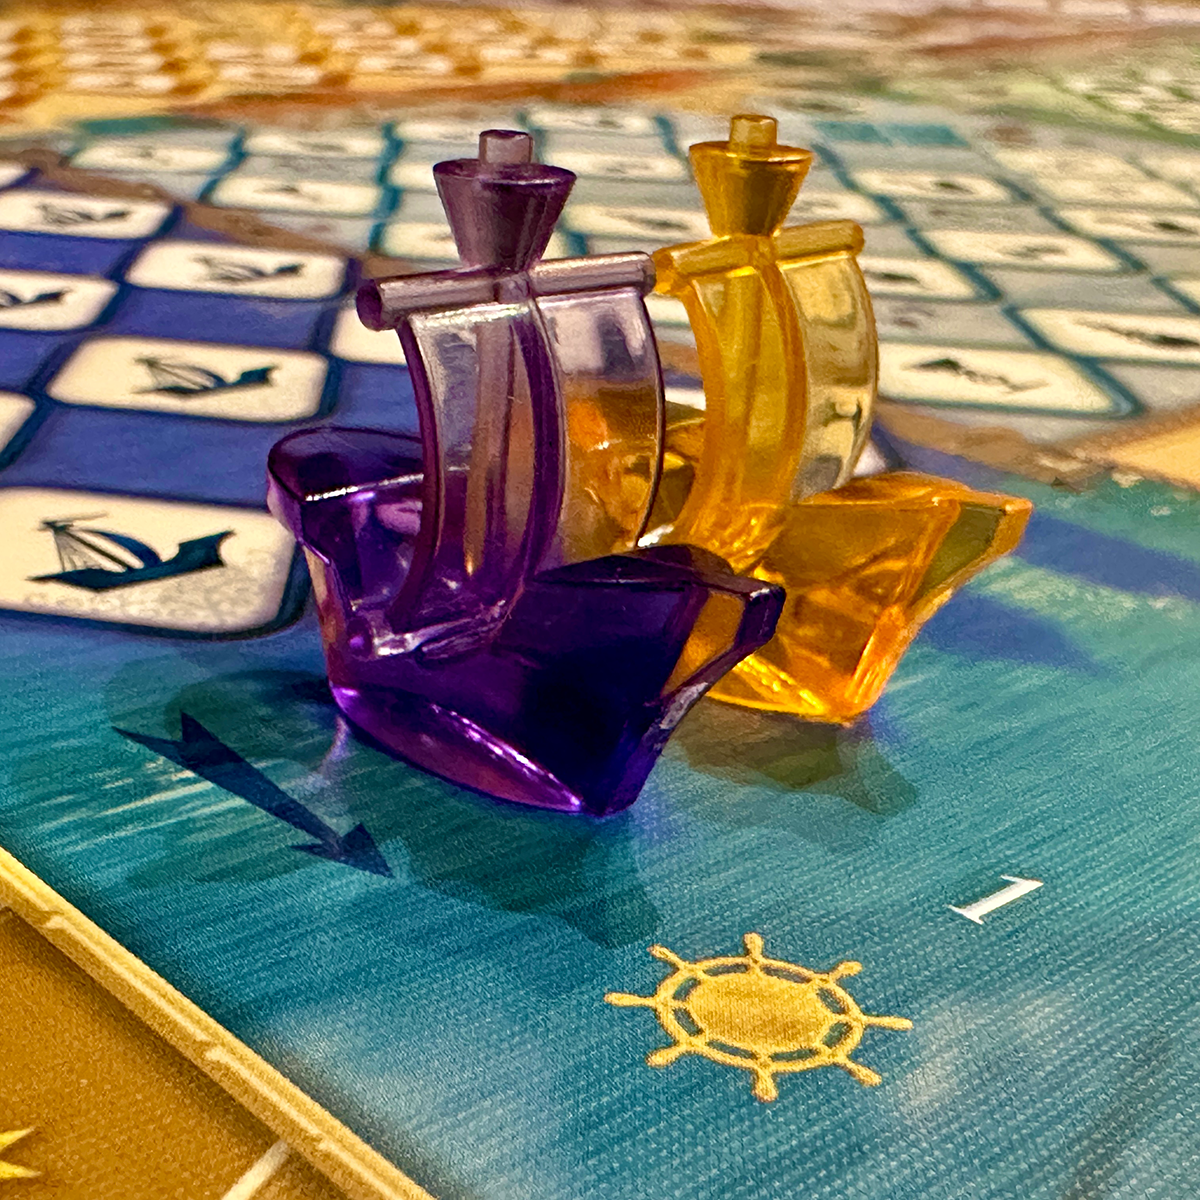 Mille Fiori Board Game Review boats